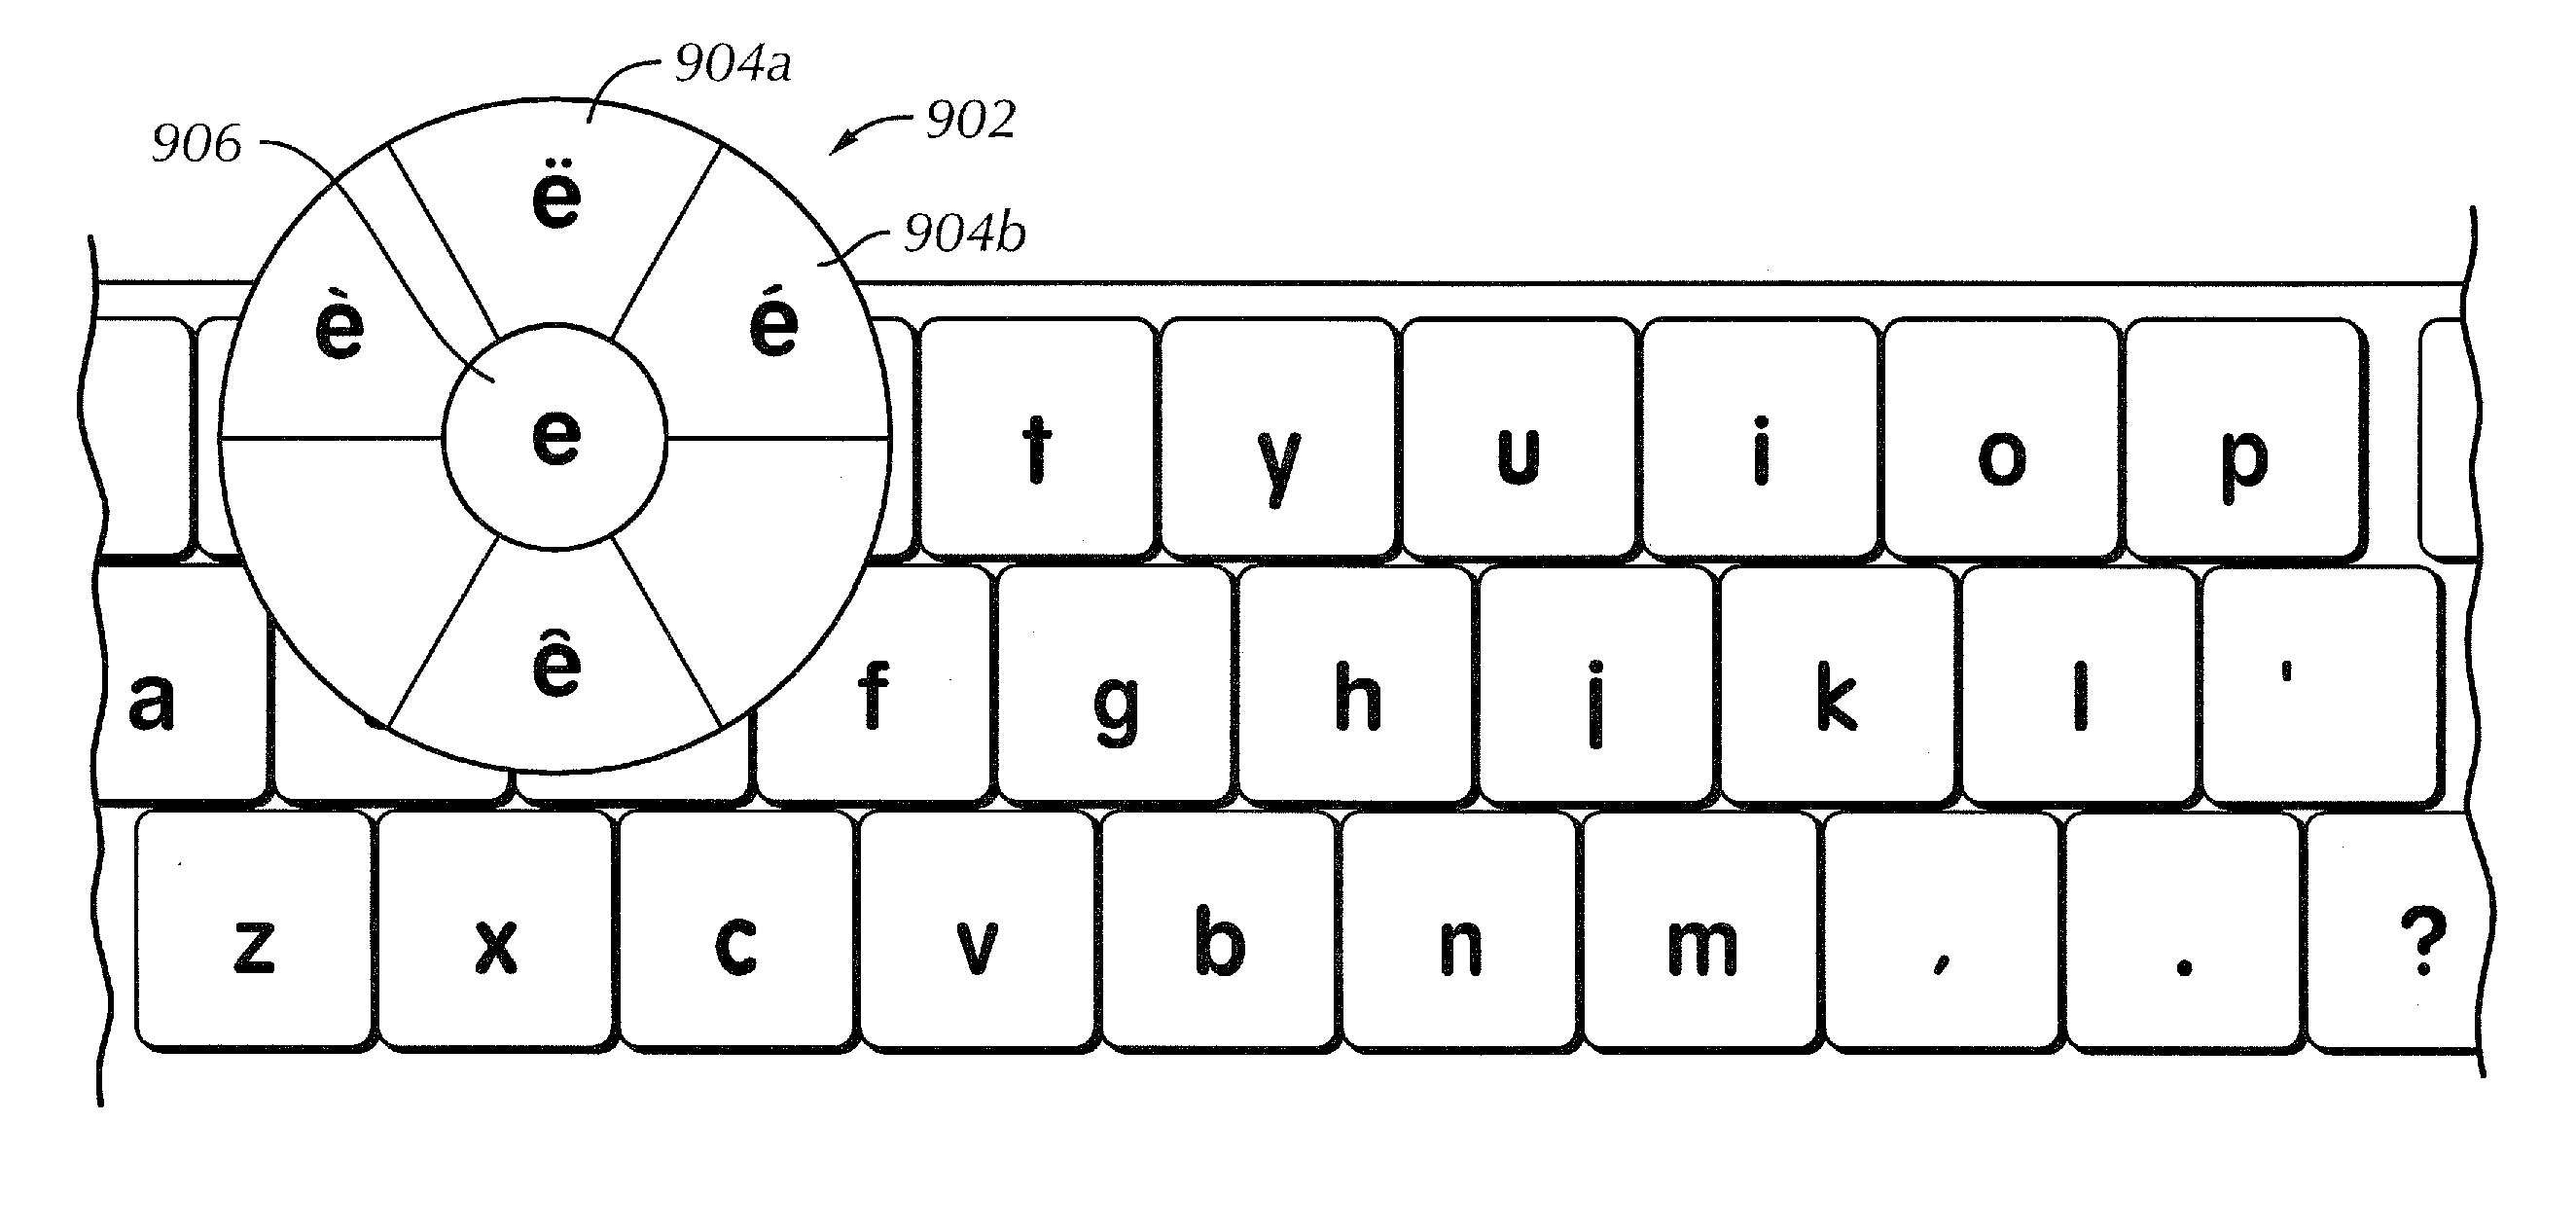 Operation of a computer with touch screen interface